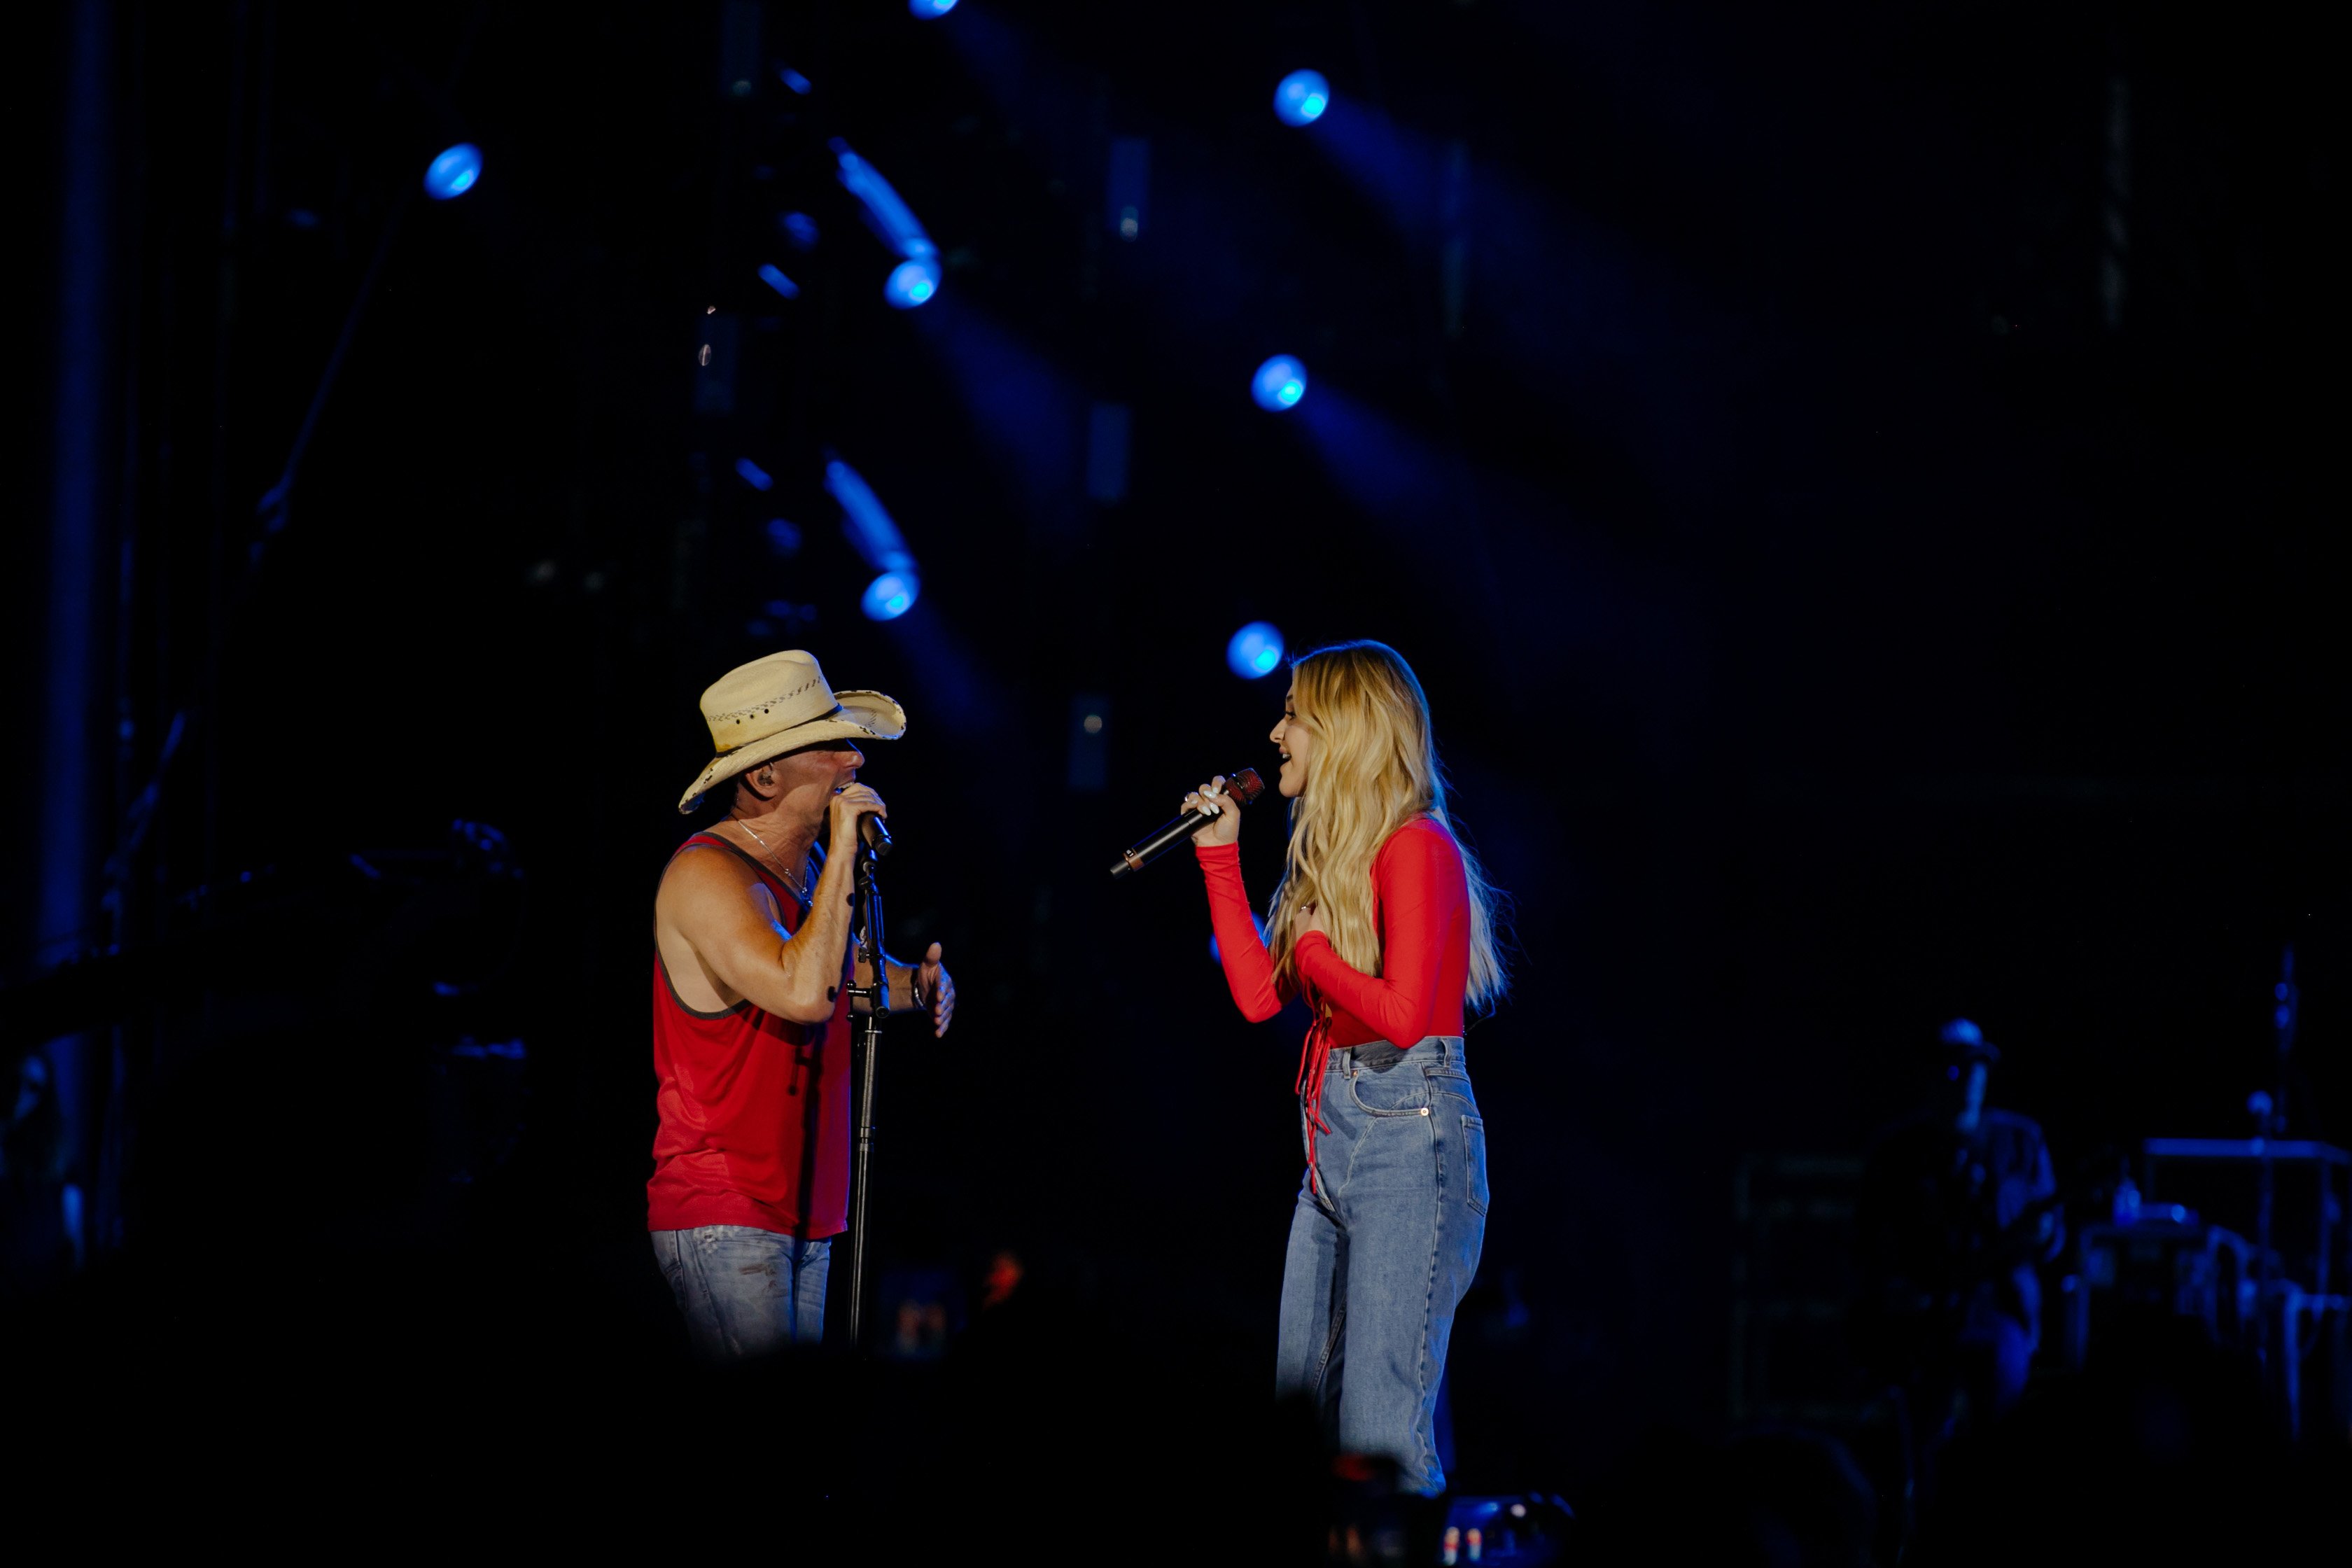 Kenny Chesney performs with surprise guest Kelsea Ballerini at Nissan Stadium